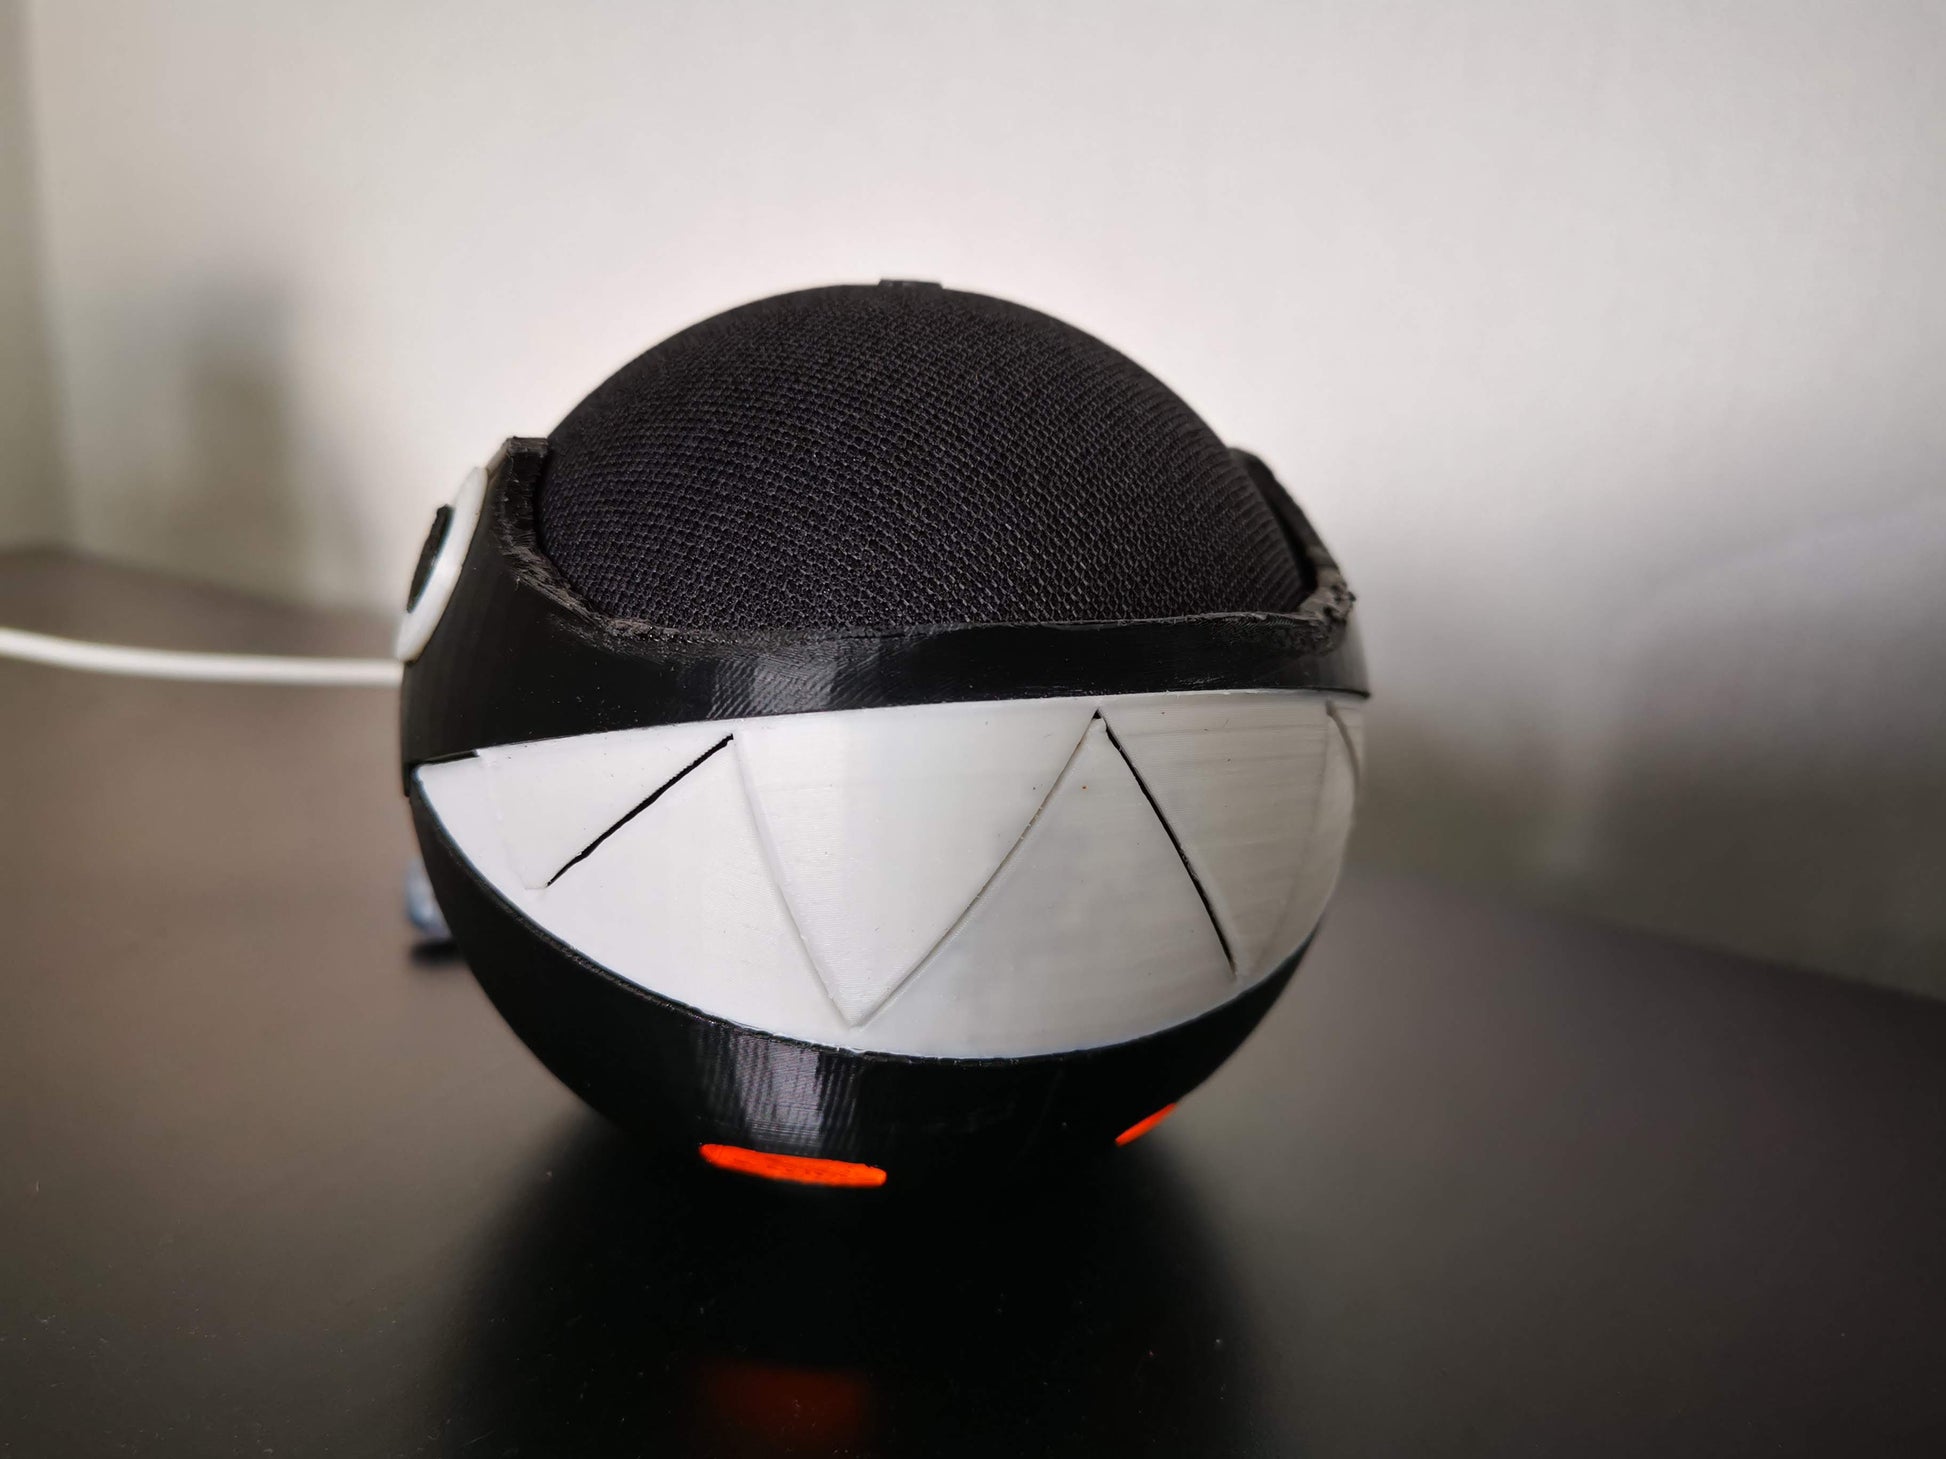 Chain Chomp Alexa Echo holder from front side angle close up